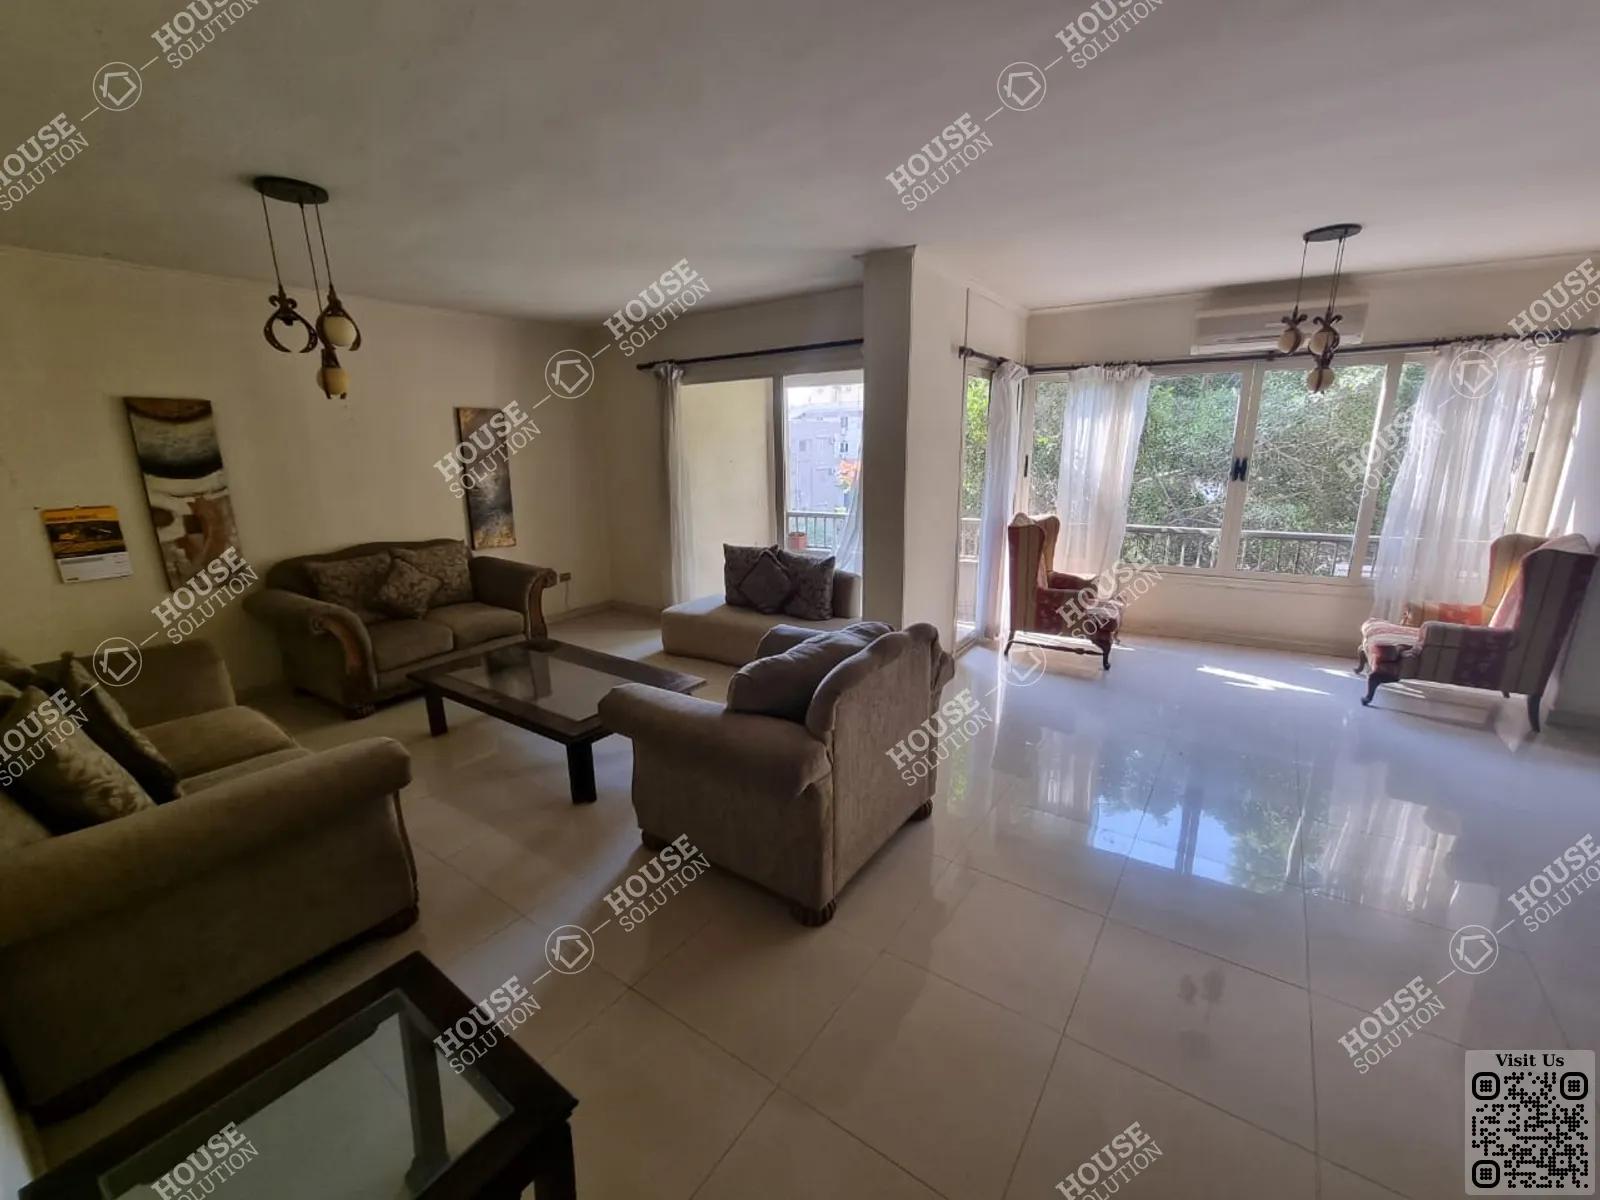 RECEPTION  @ Apartments For Rent In Maadi Maadi Degla Area: 280 m² consists of 4 Bedrooms 3 Bathrooms Modern furnished 5 stars #5480-0